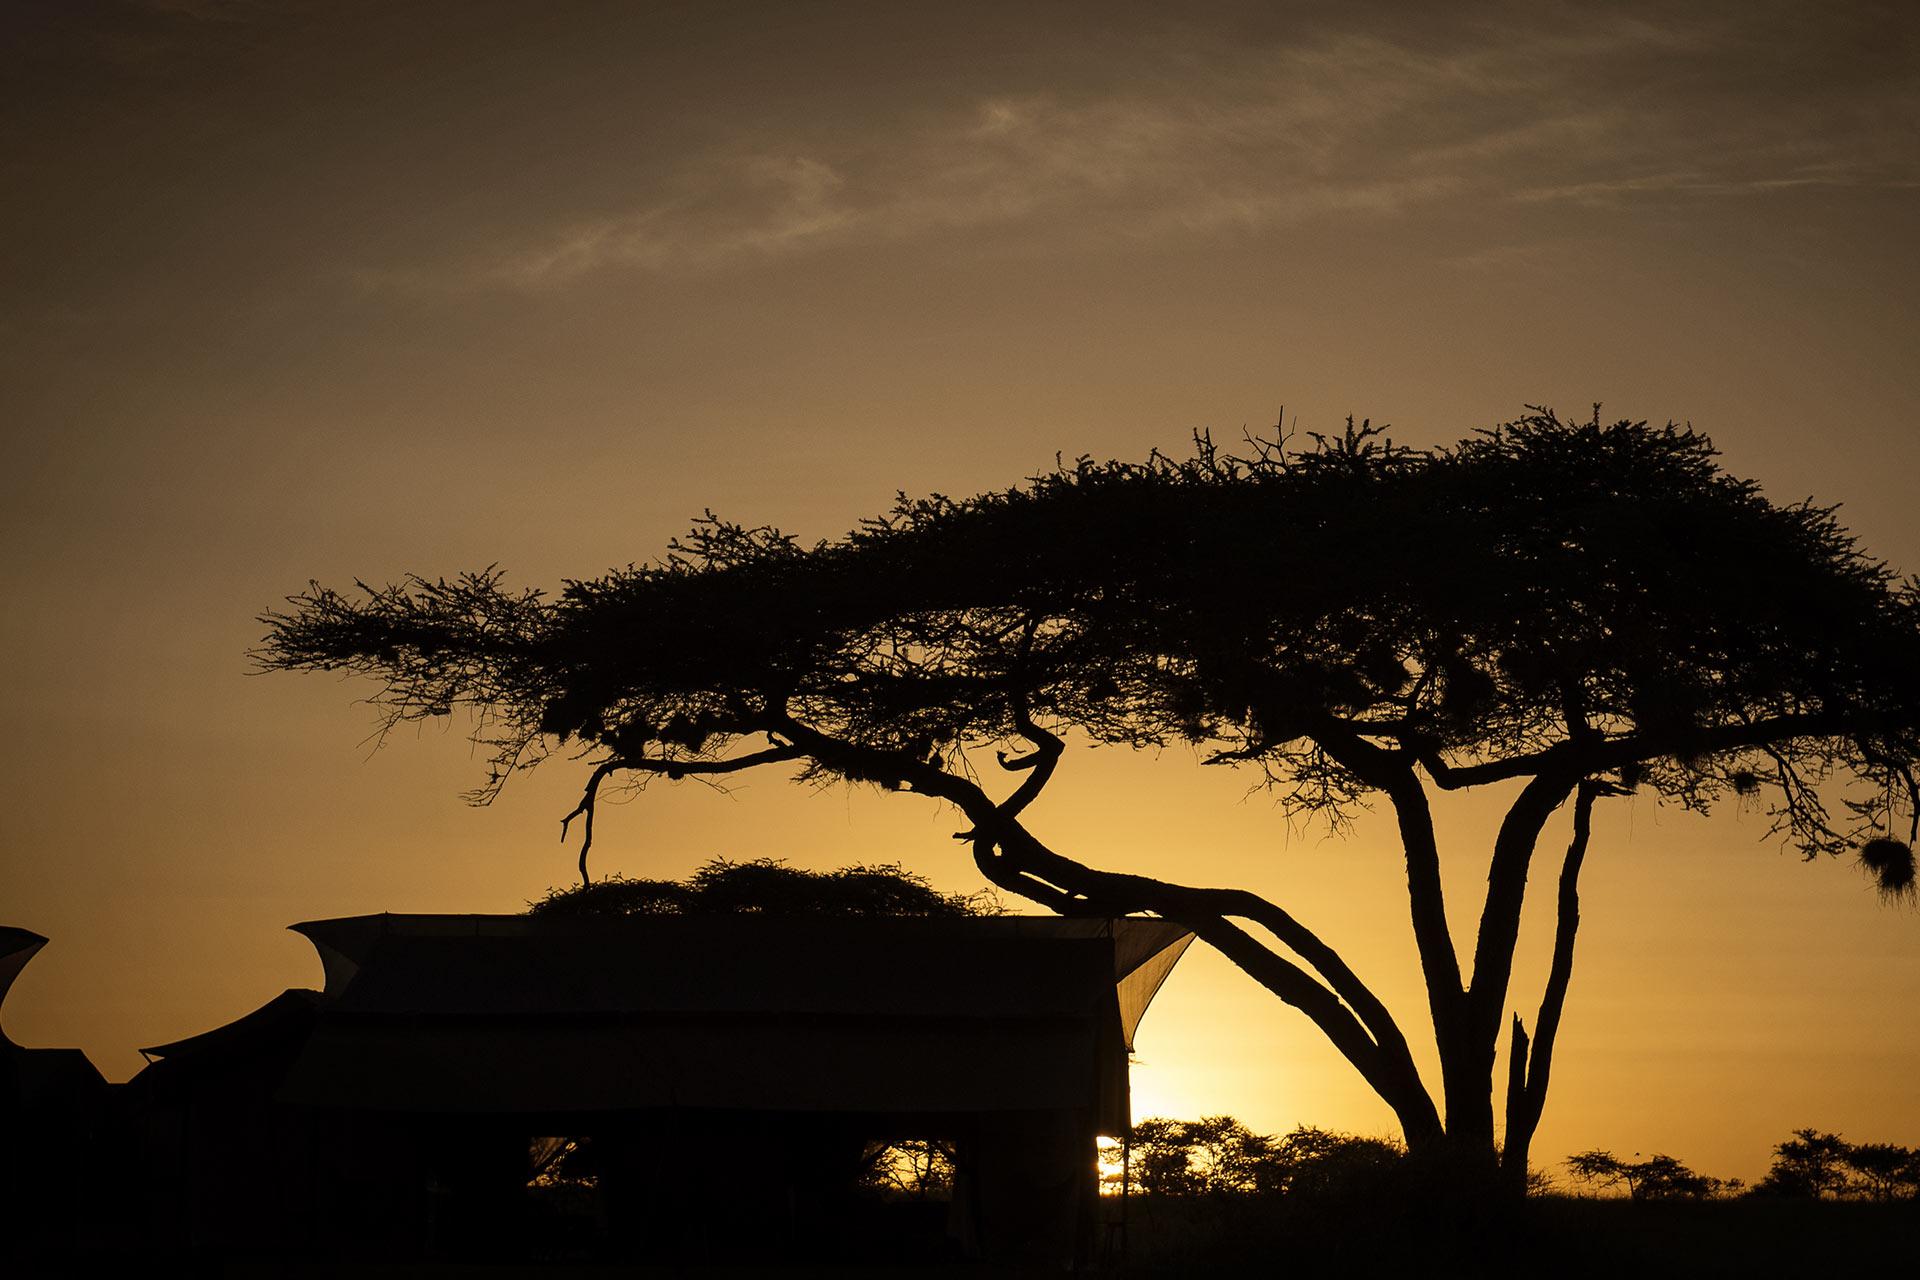 The Siringit Serengeti Camp by Mantis is located under a canopy of Tortillas Acacia trees along the wildlife migration trails